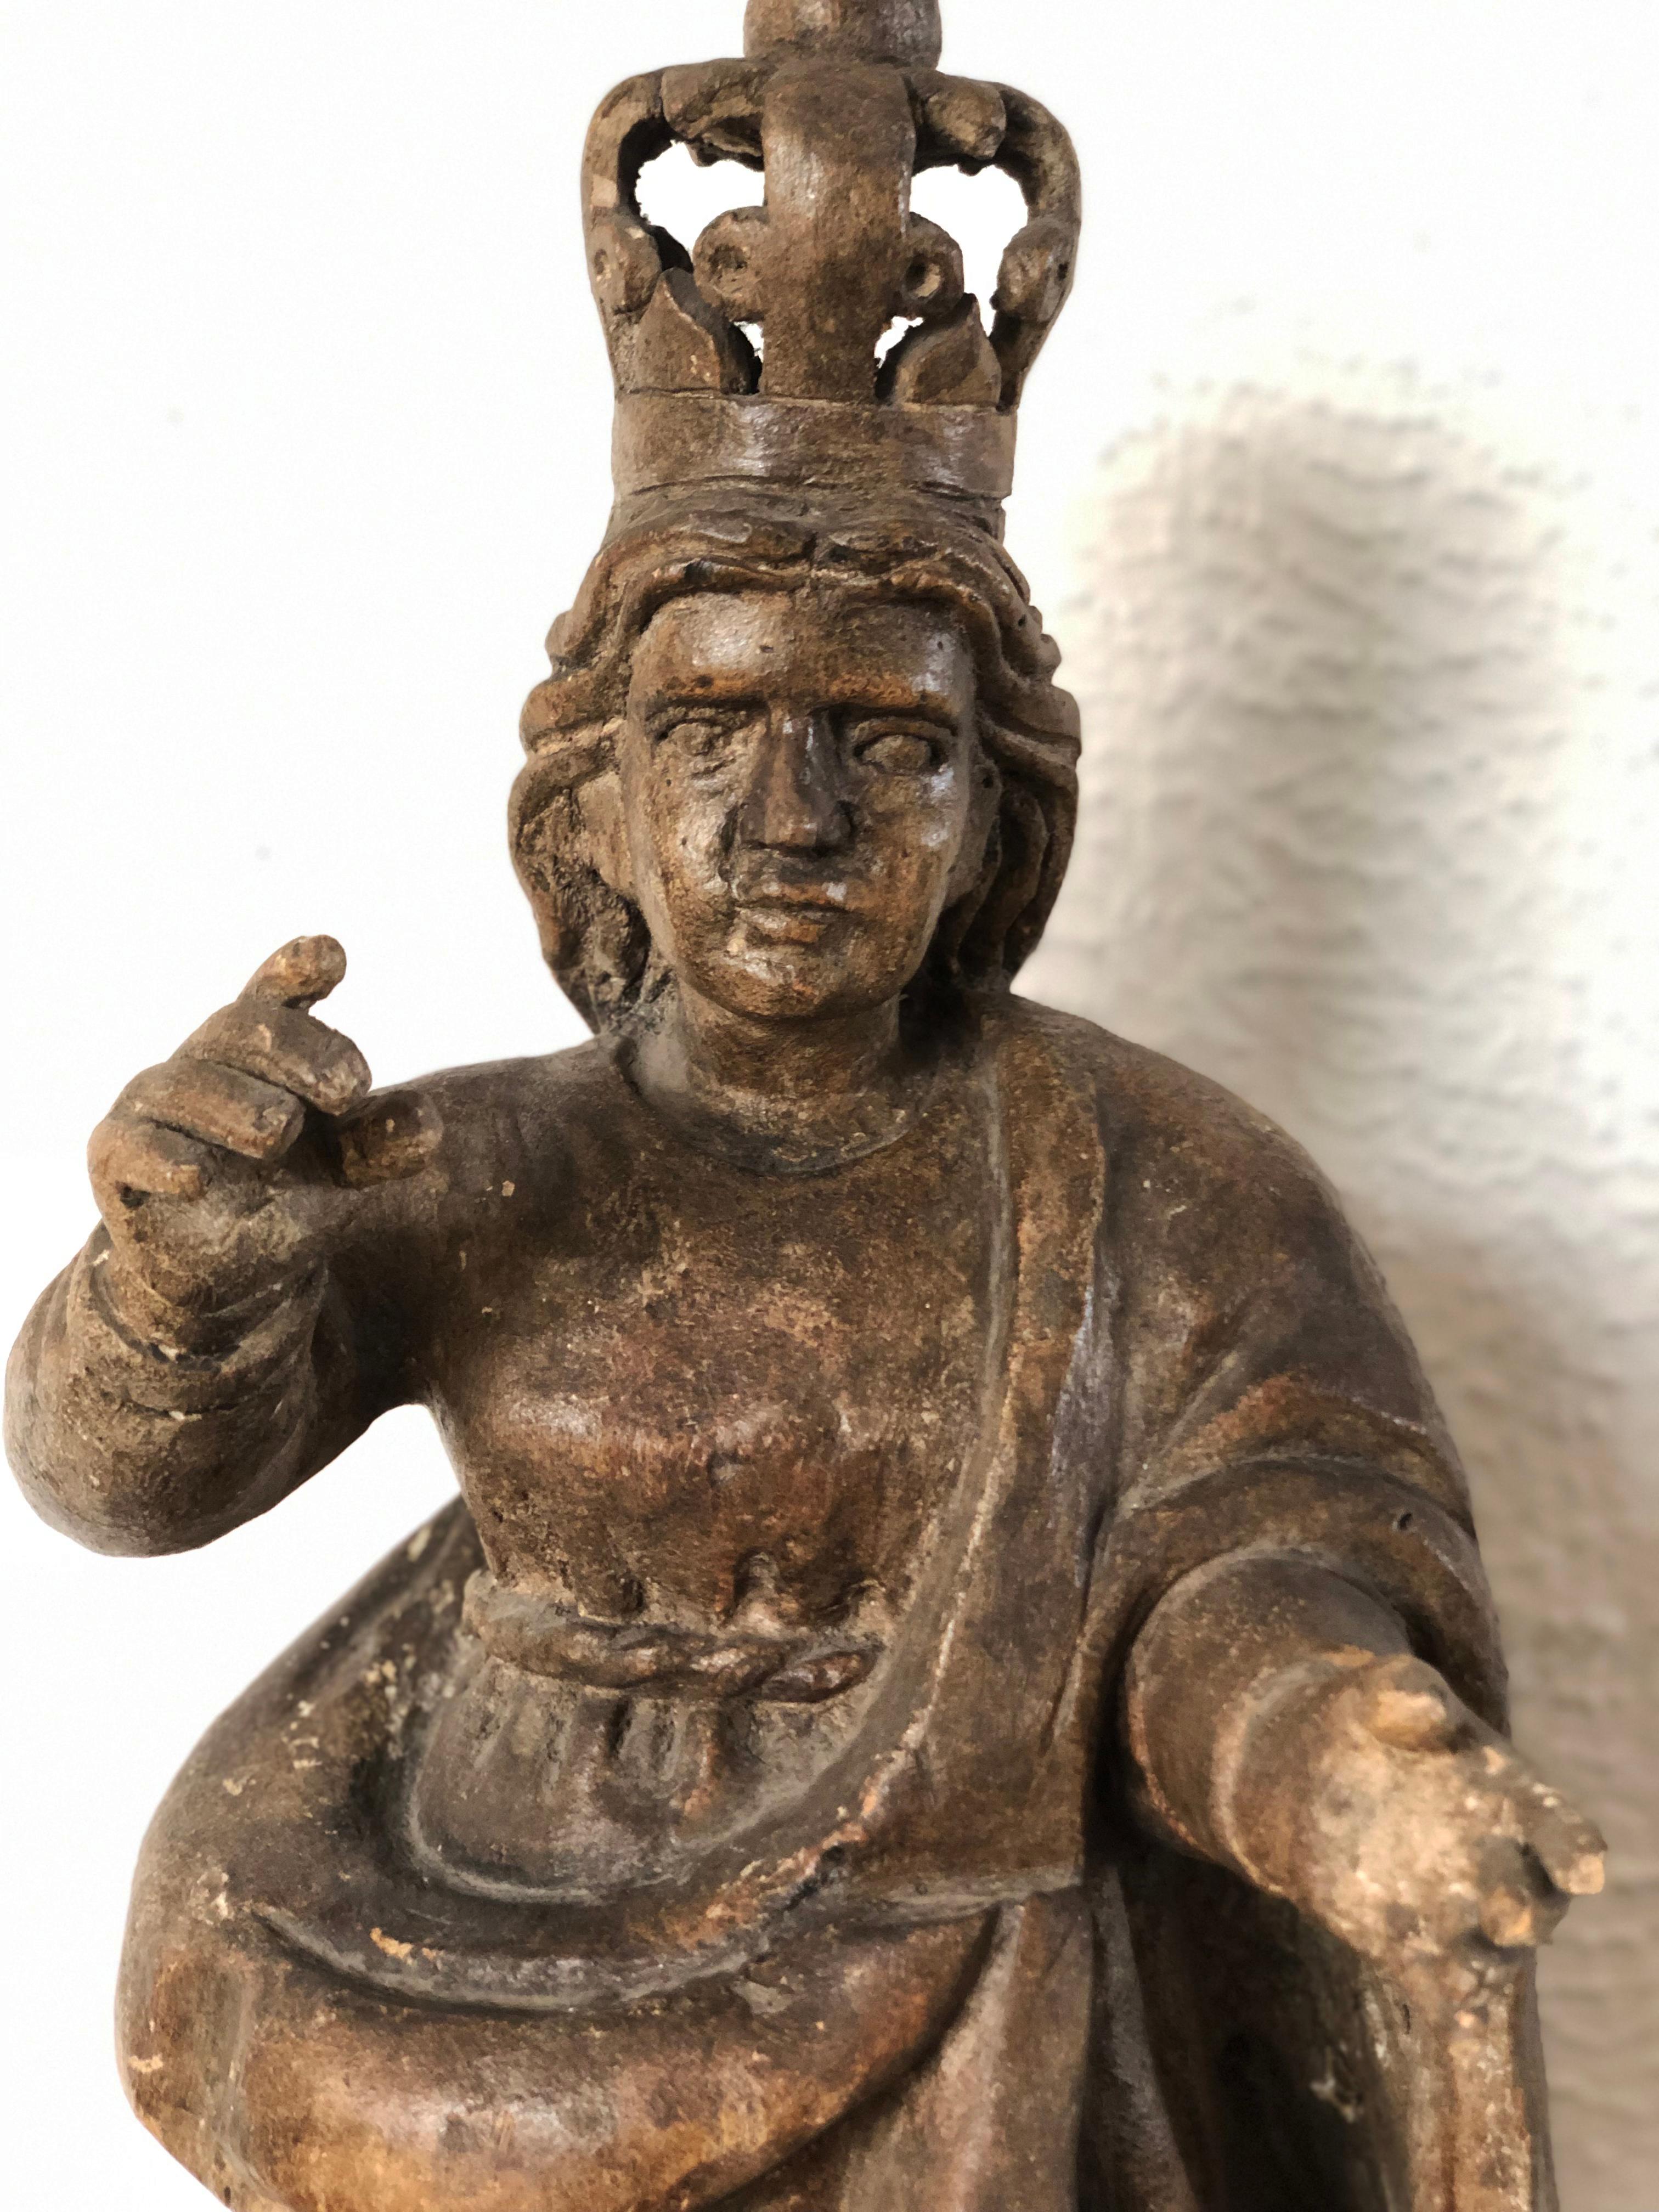 Hand-Carved 19th Century Religious Wood Figure Found in Western Mexico, circa 1900